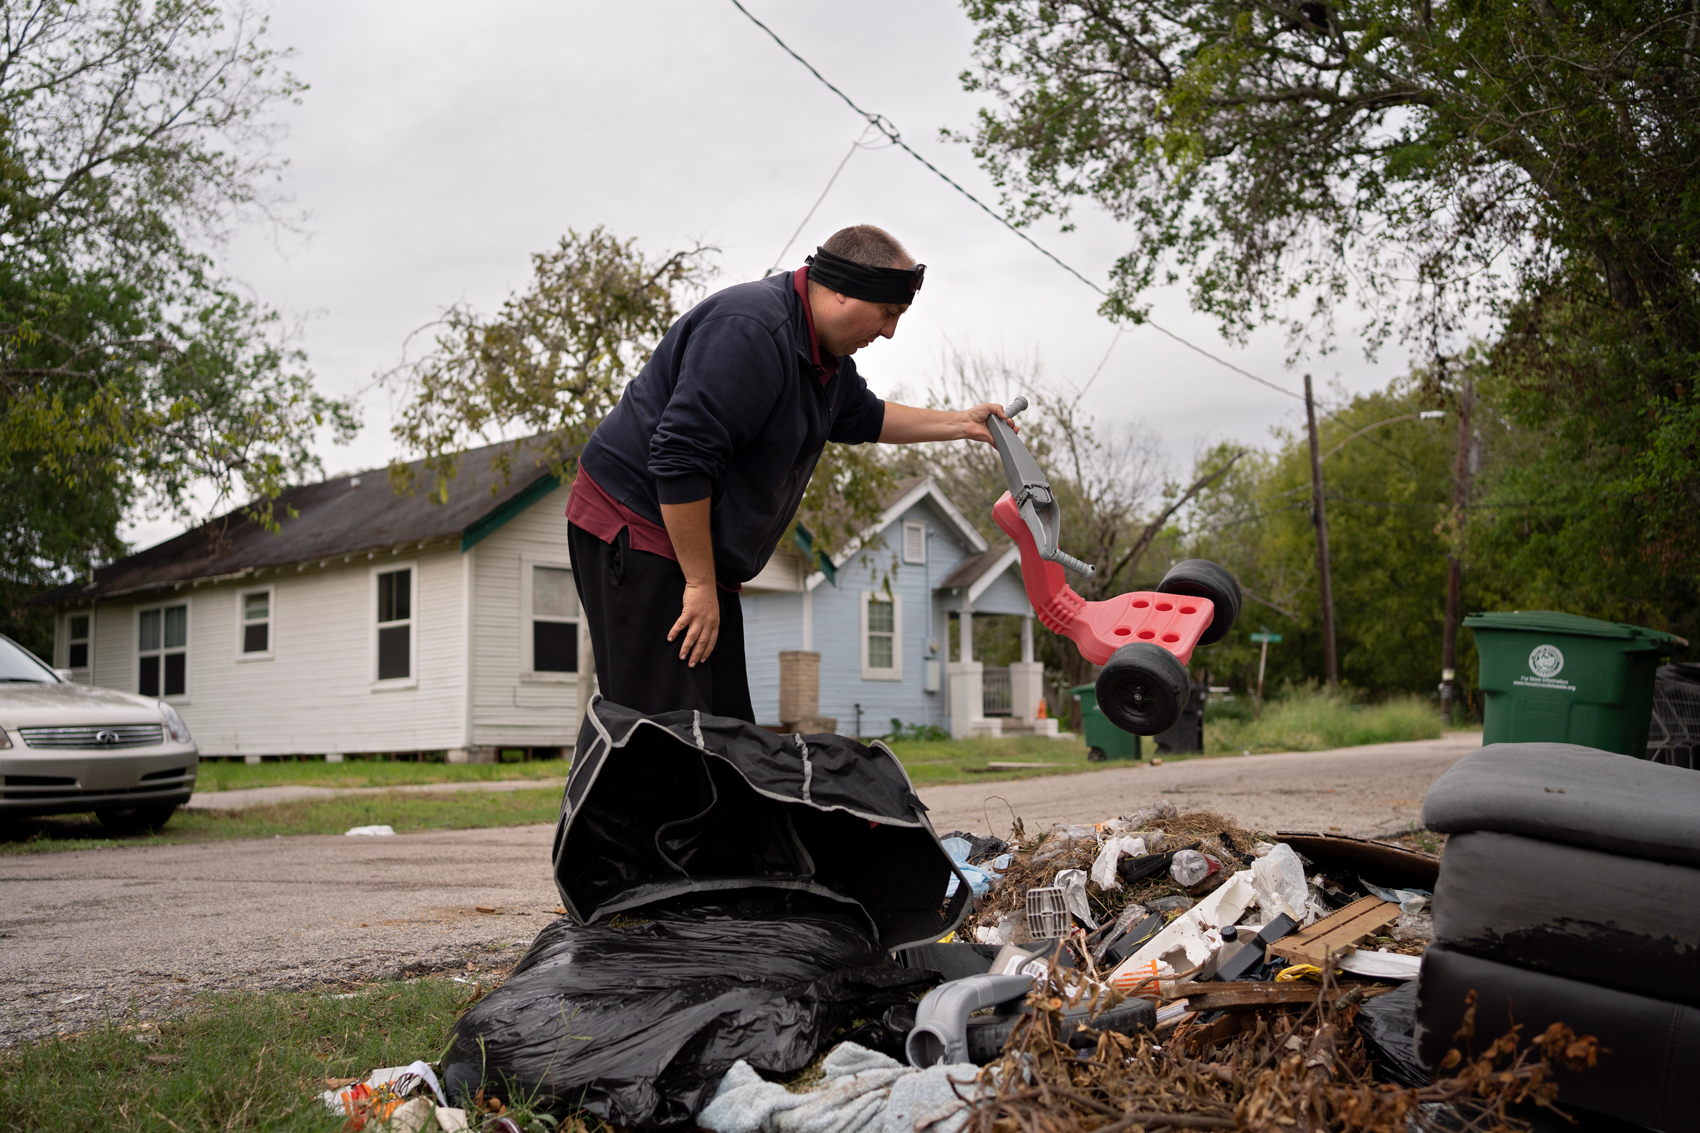 Edward D. Pettitt II sifts through a trash pile on an empty Midtown Redevelopment Authority lot located in the Third Ward neighborhood of Houston, Texas.